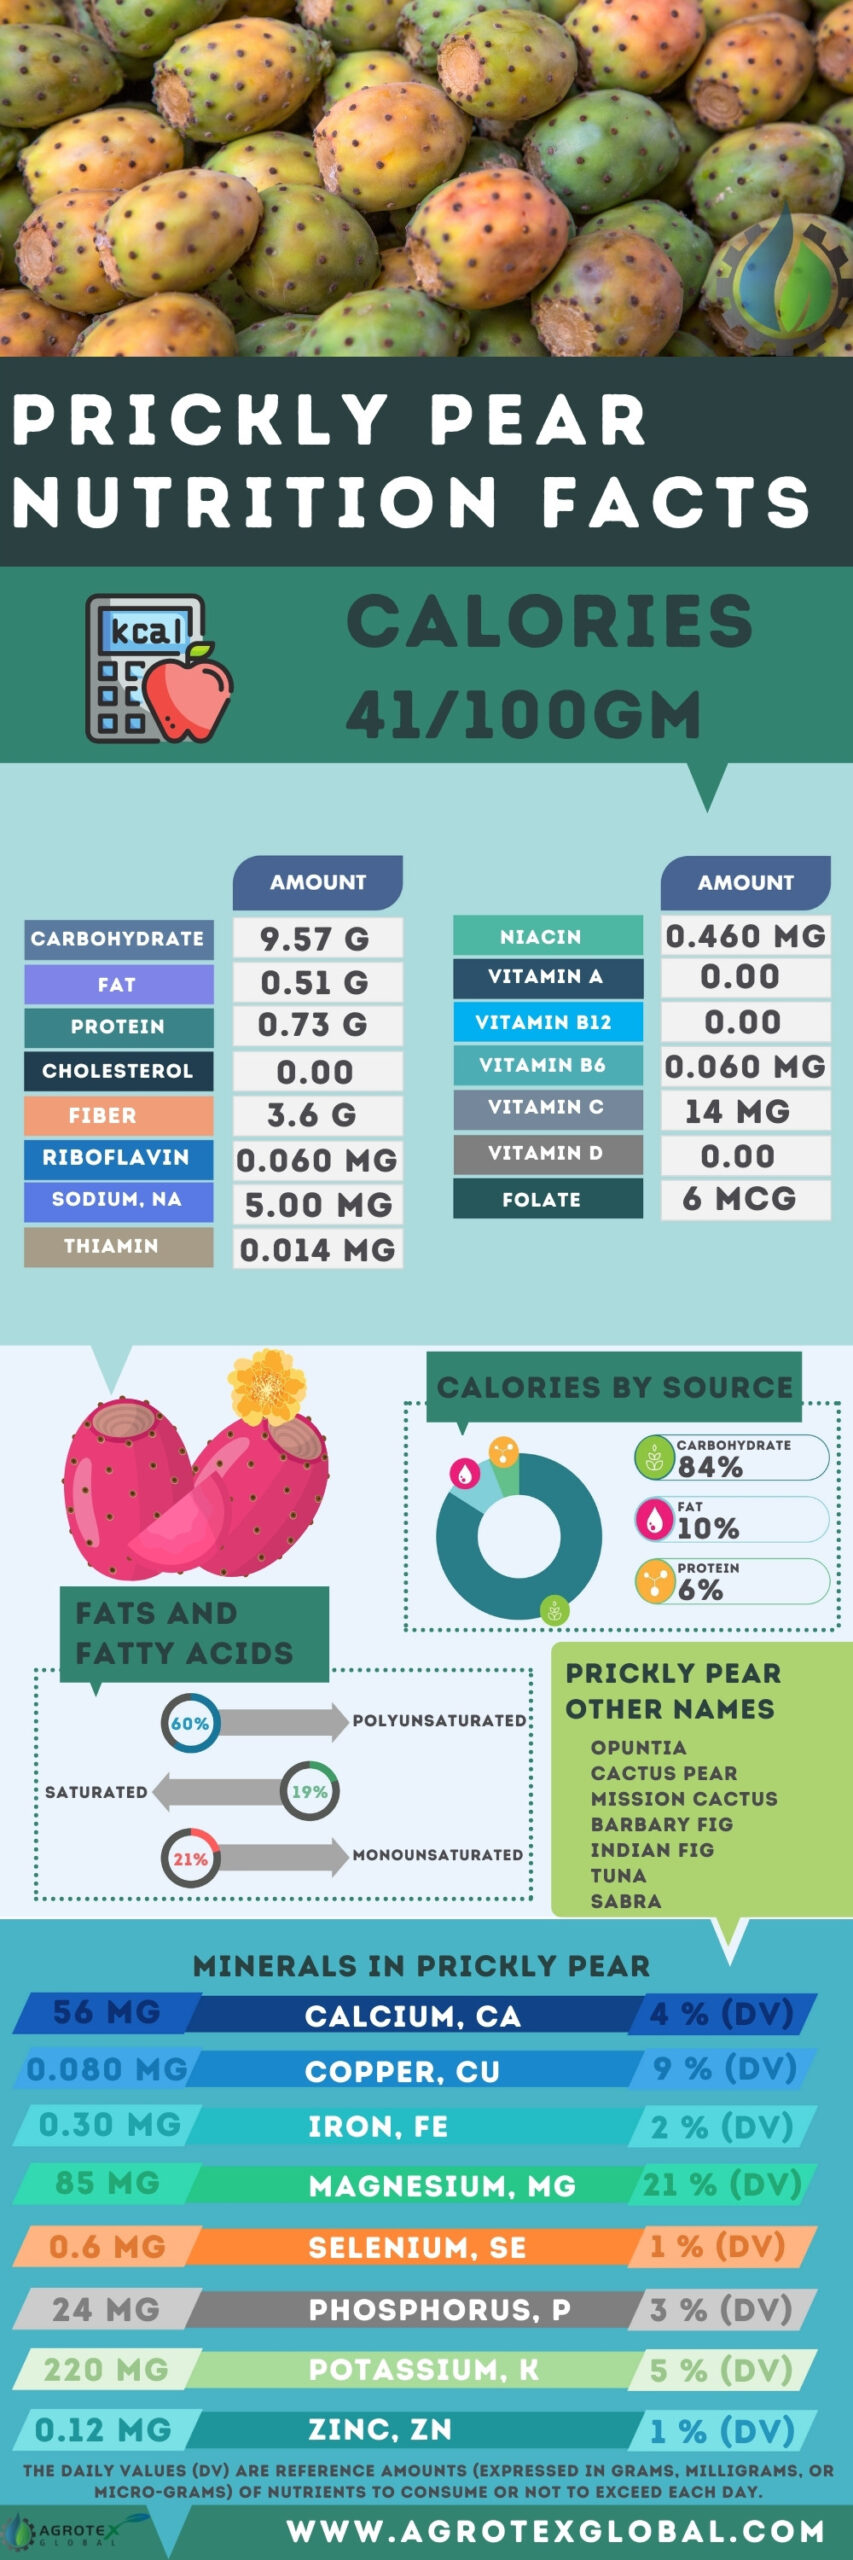 Prickly Pear Pomegranate NUTRITION FACTS calorie chart infographic